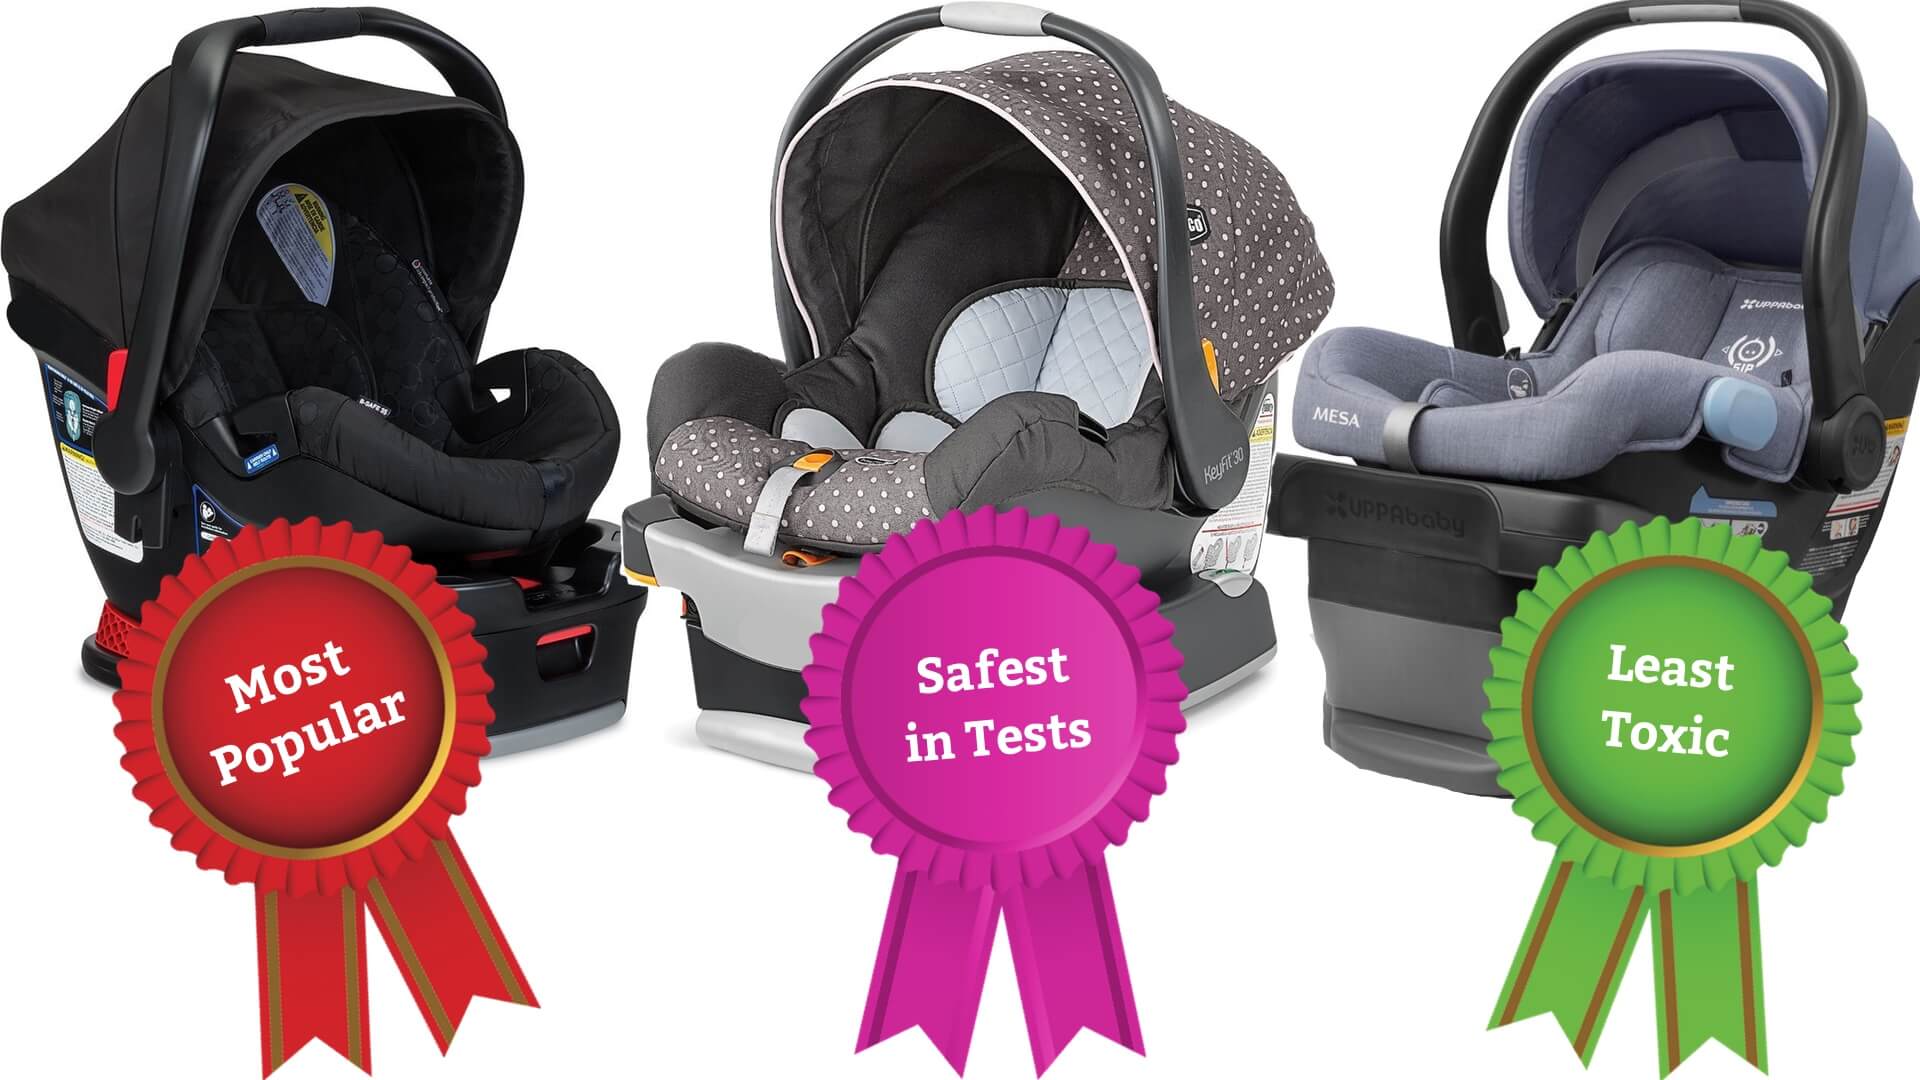 Best Infant Car Seat Safest Most Natural Options - Which Car Seat Is Best For Baby